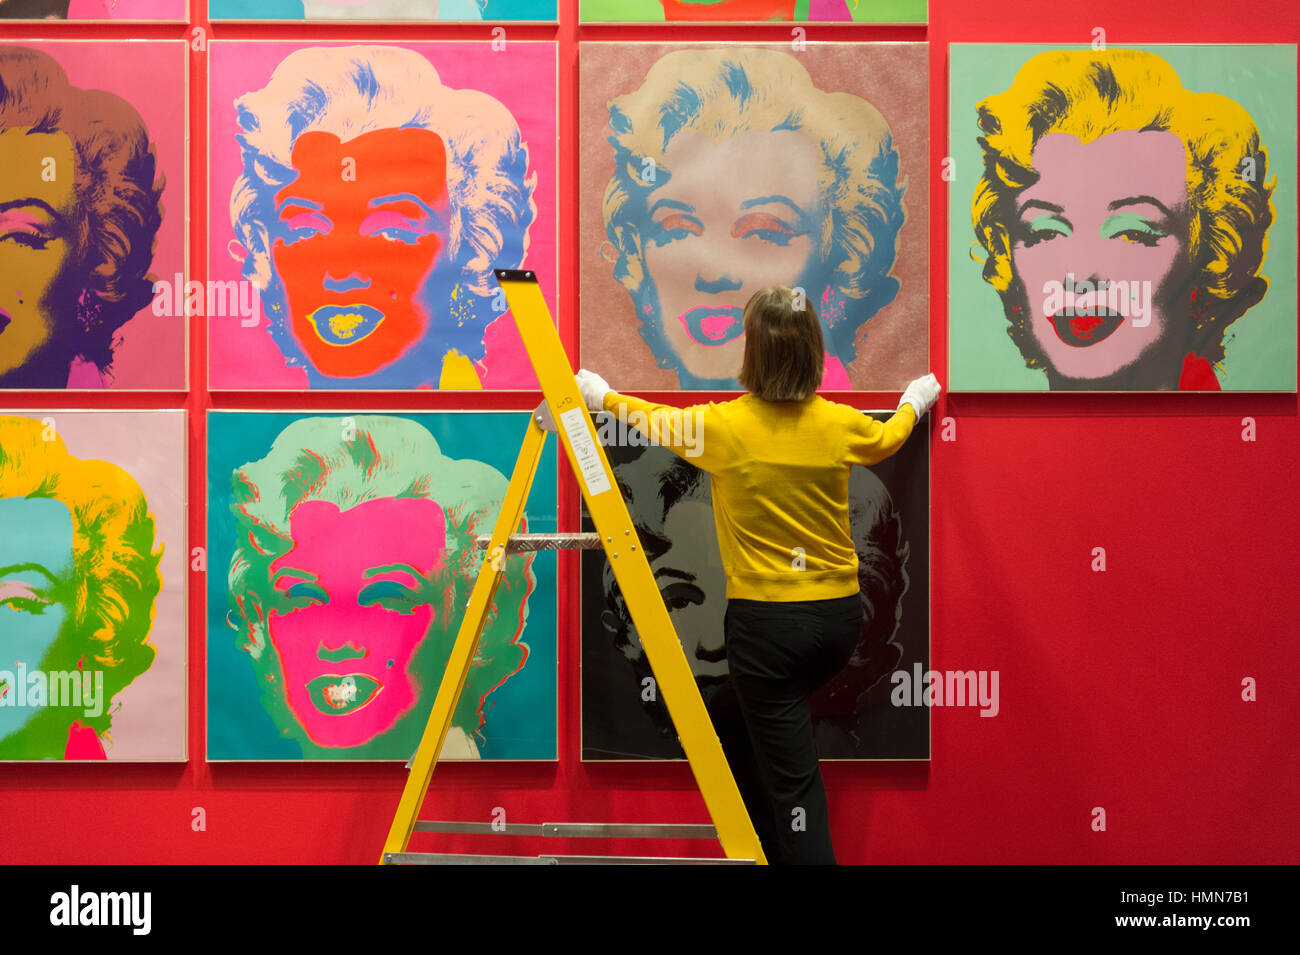 British Museum, London, UK. 10th February, 2017. 10 colour screenprints created 50 years ago by Andy Warhol have been installed in the British Museum’s Sainsbury Exhibitions Gallery ahead of the opening on 9th March of the Museum’s spring headline exhibition The American Dream: Pop to the present. Project curator Catherine Daunt makes final adjustments to the works positioning on the gallery walls. © 2016 The Andy Warhol Foundation for the Visual Arts, Inc./Artists Rights Society (ARS), New York and DACS, London. Tate, London 2016. Credit: Malcolm Park editorial/Alamy Live News Stock Photo